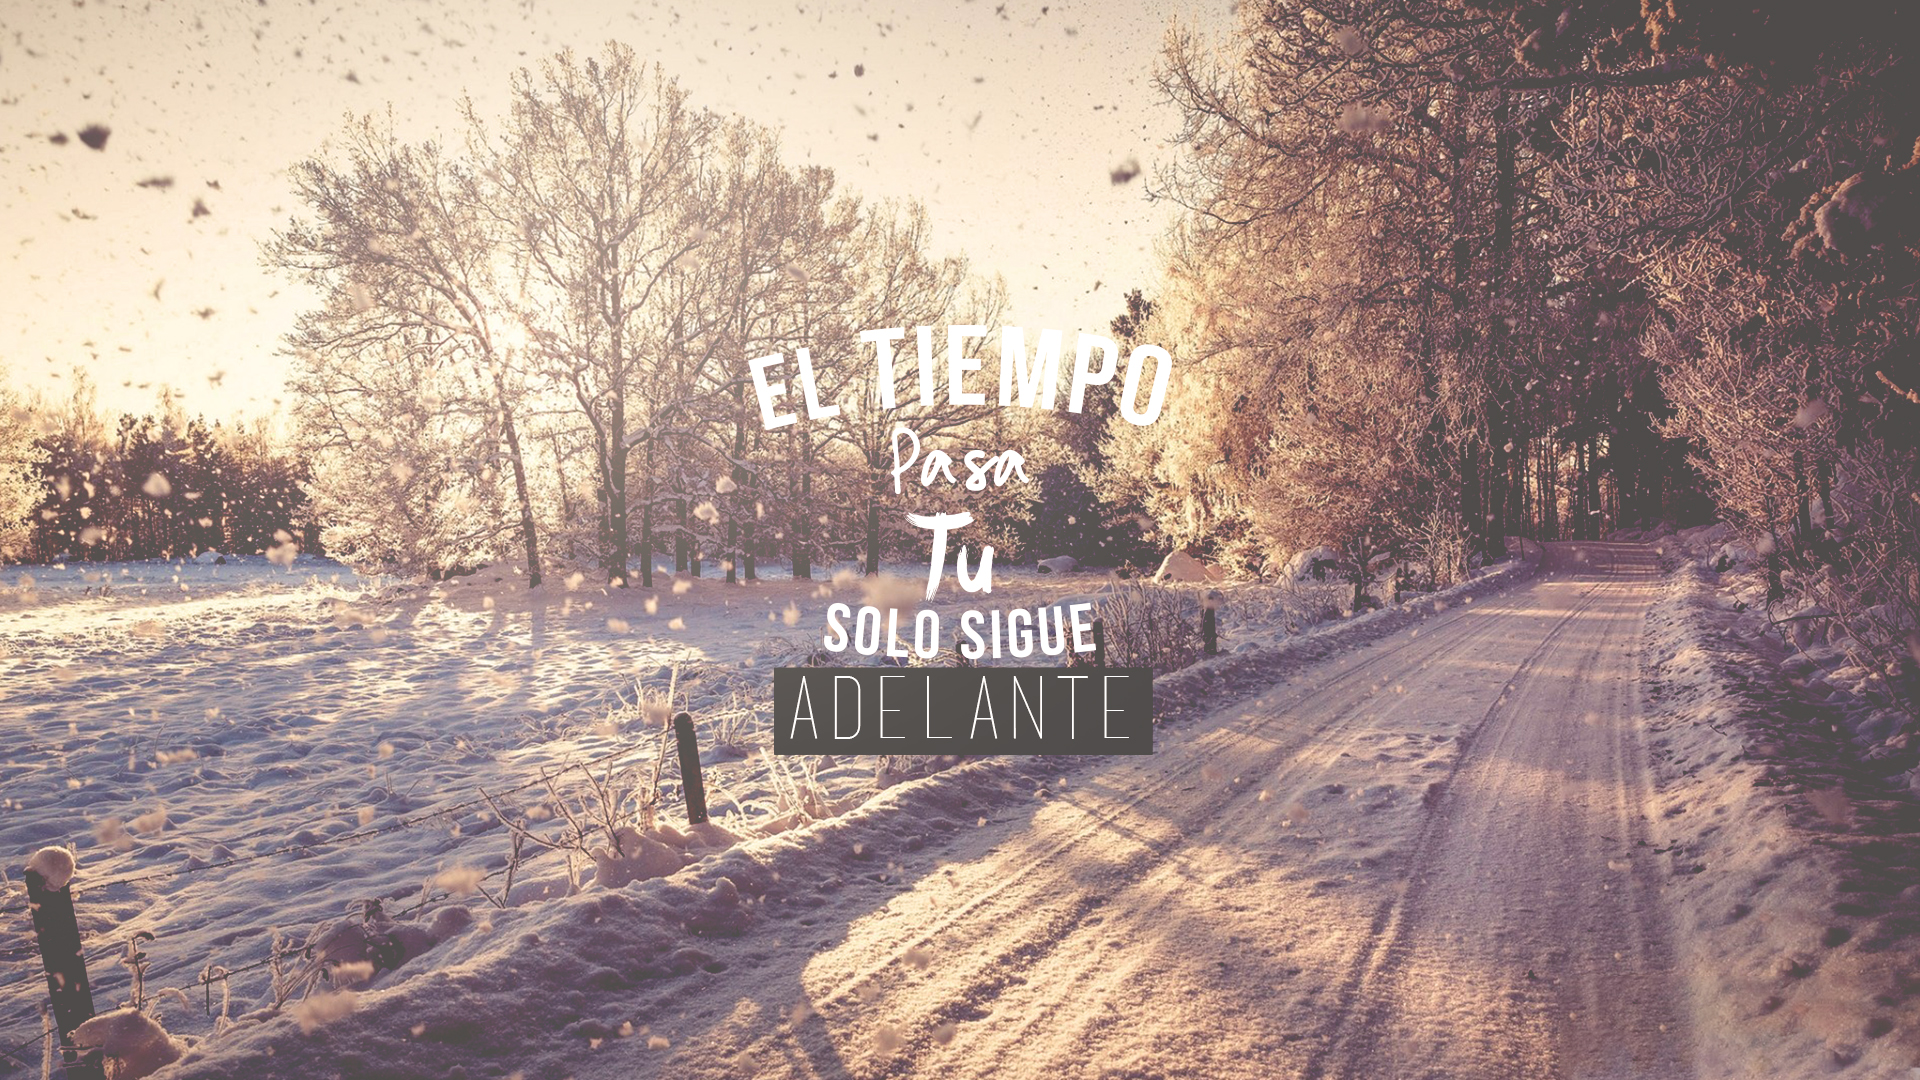 General 1920x1080 nature landscape Spanish typography snow mixed fonts